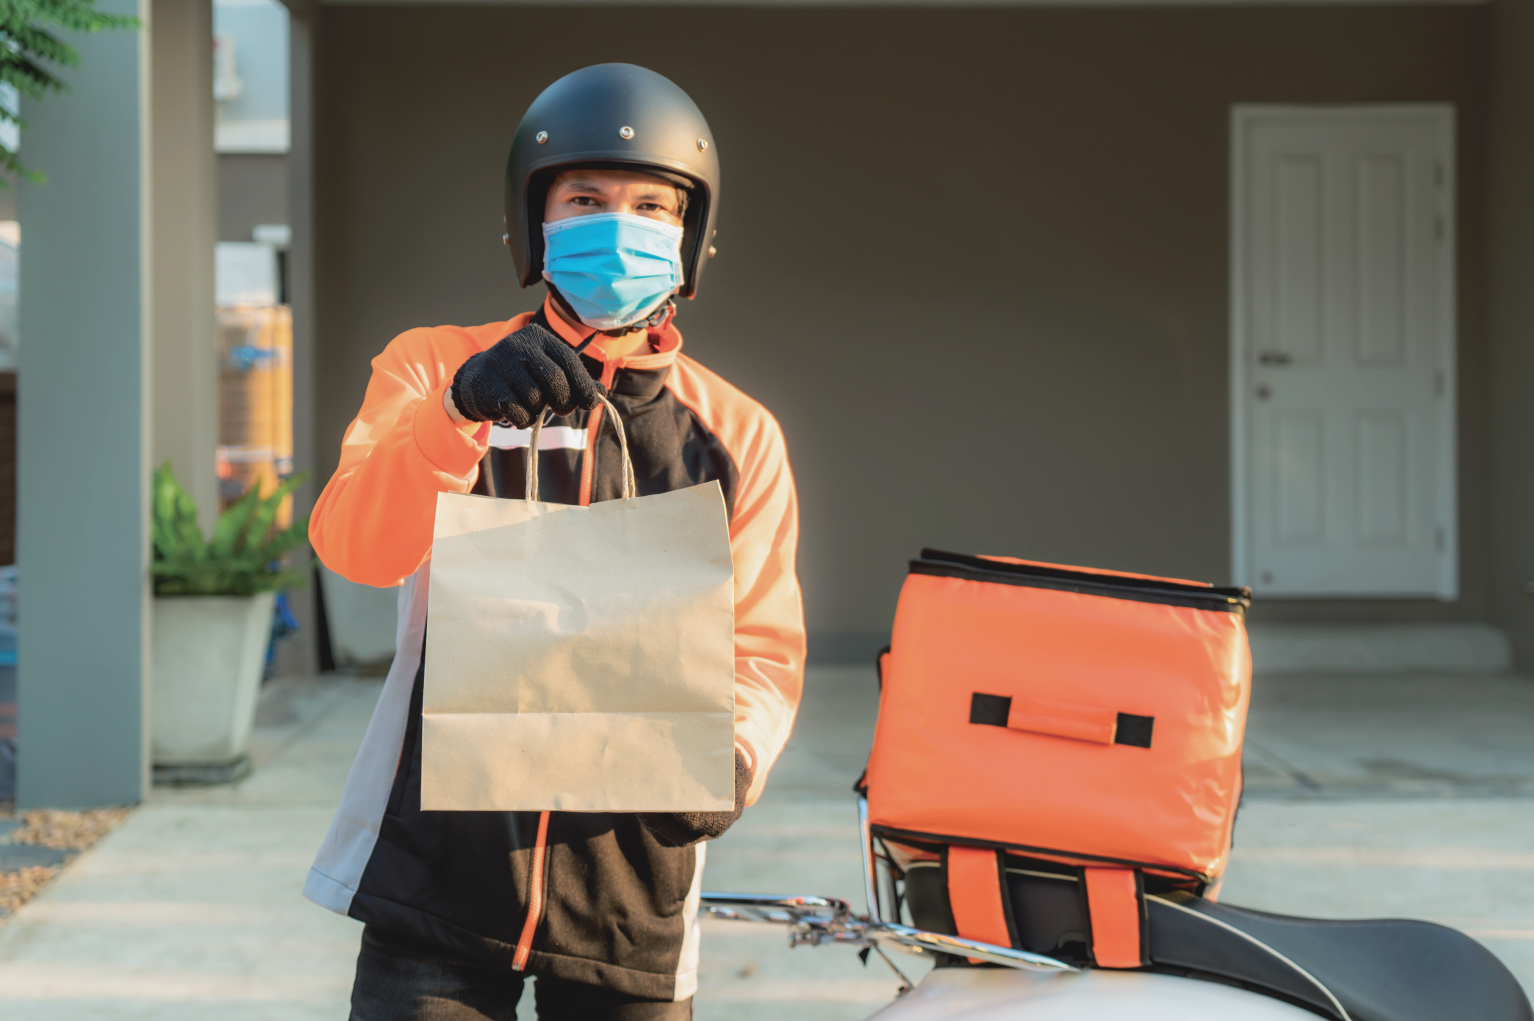 Pandemic-inspired innovation is propelling food delivery trends amid a new normal. Insight into these trends provides a glimpse into the future.